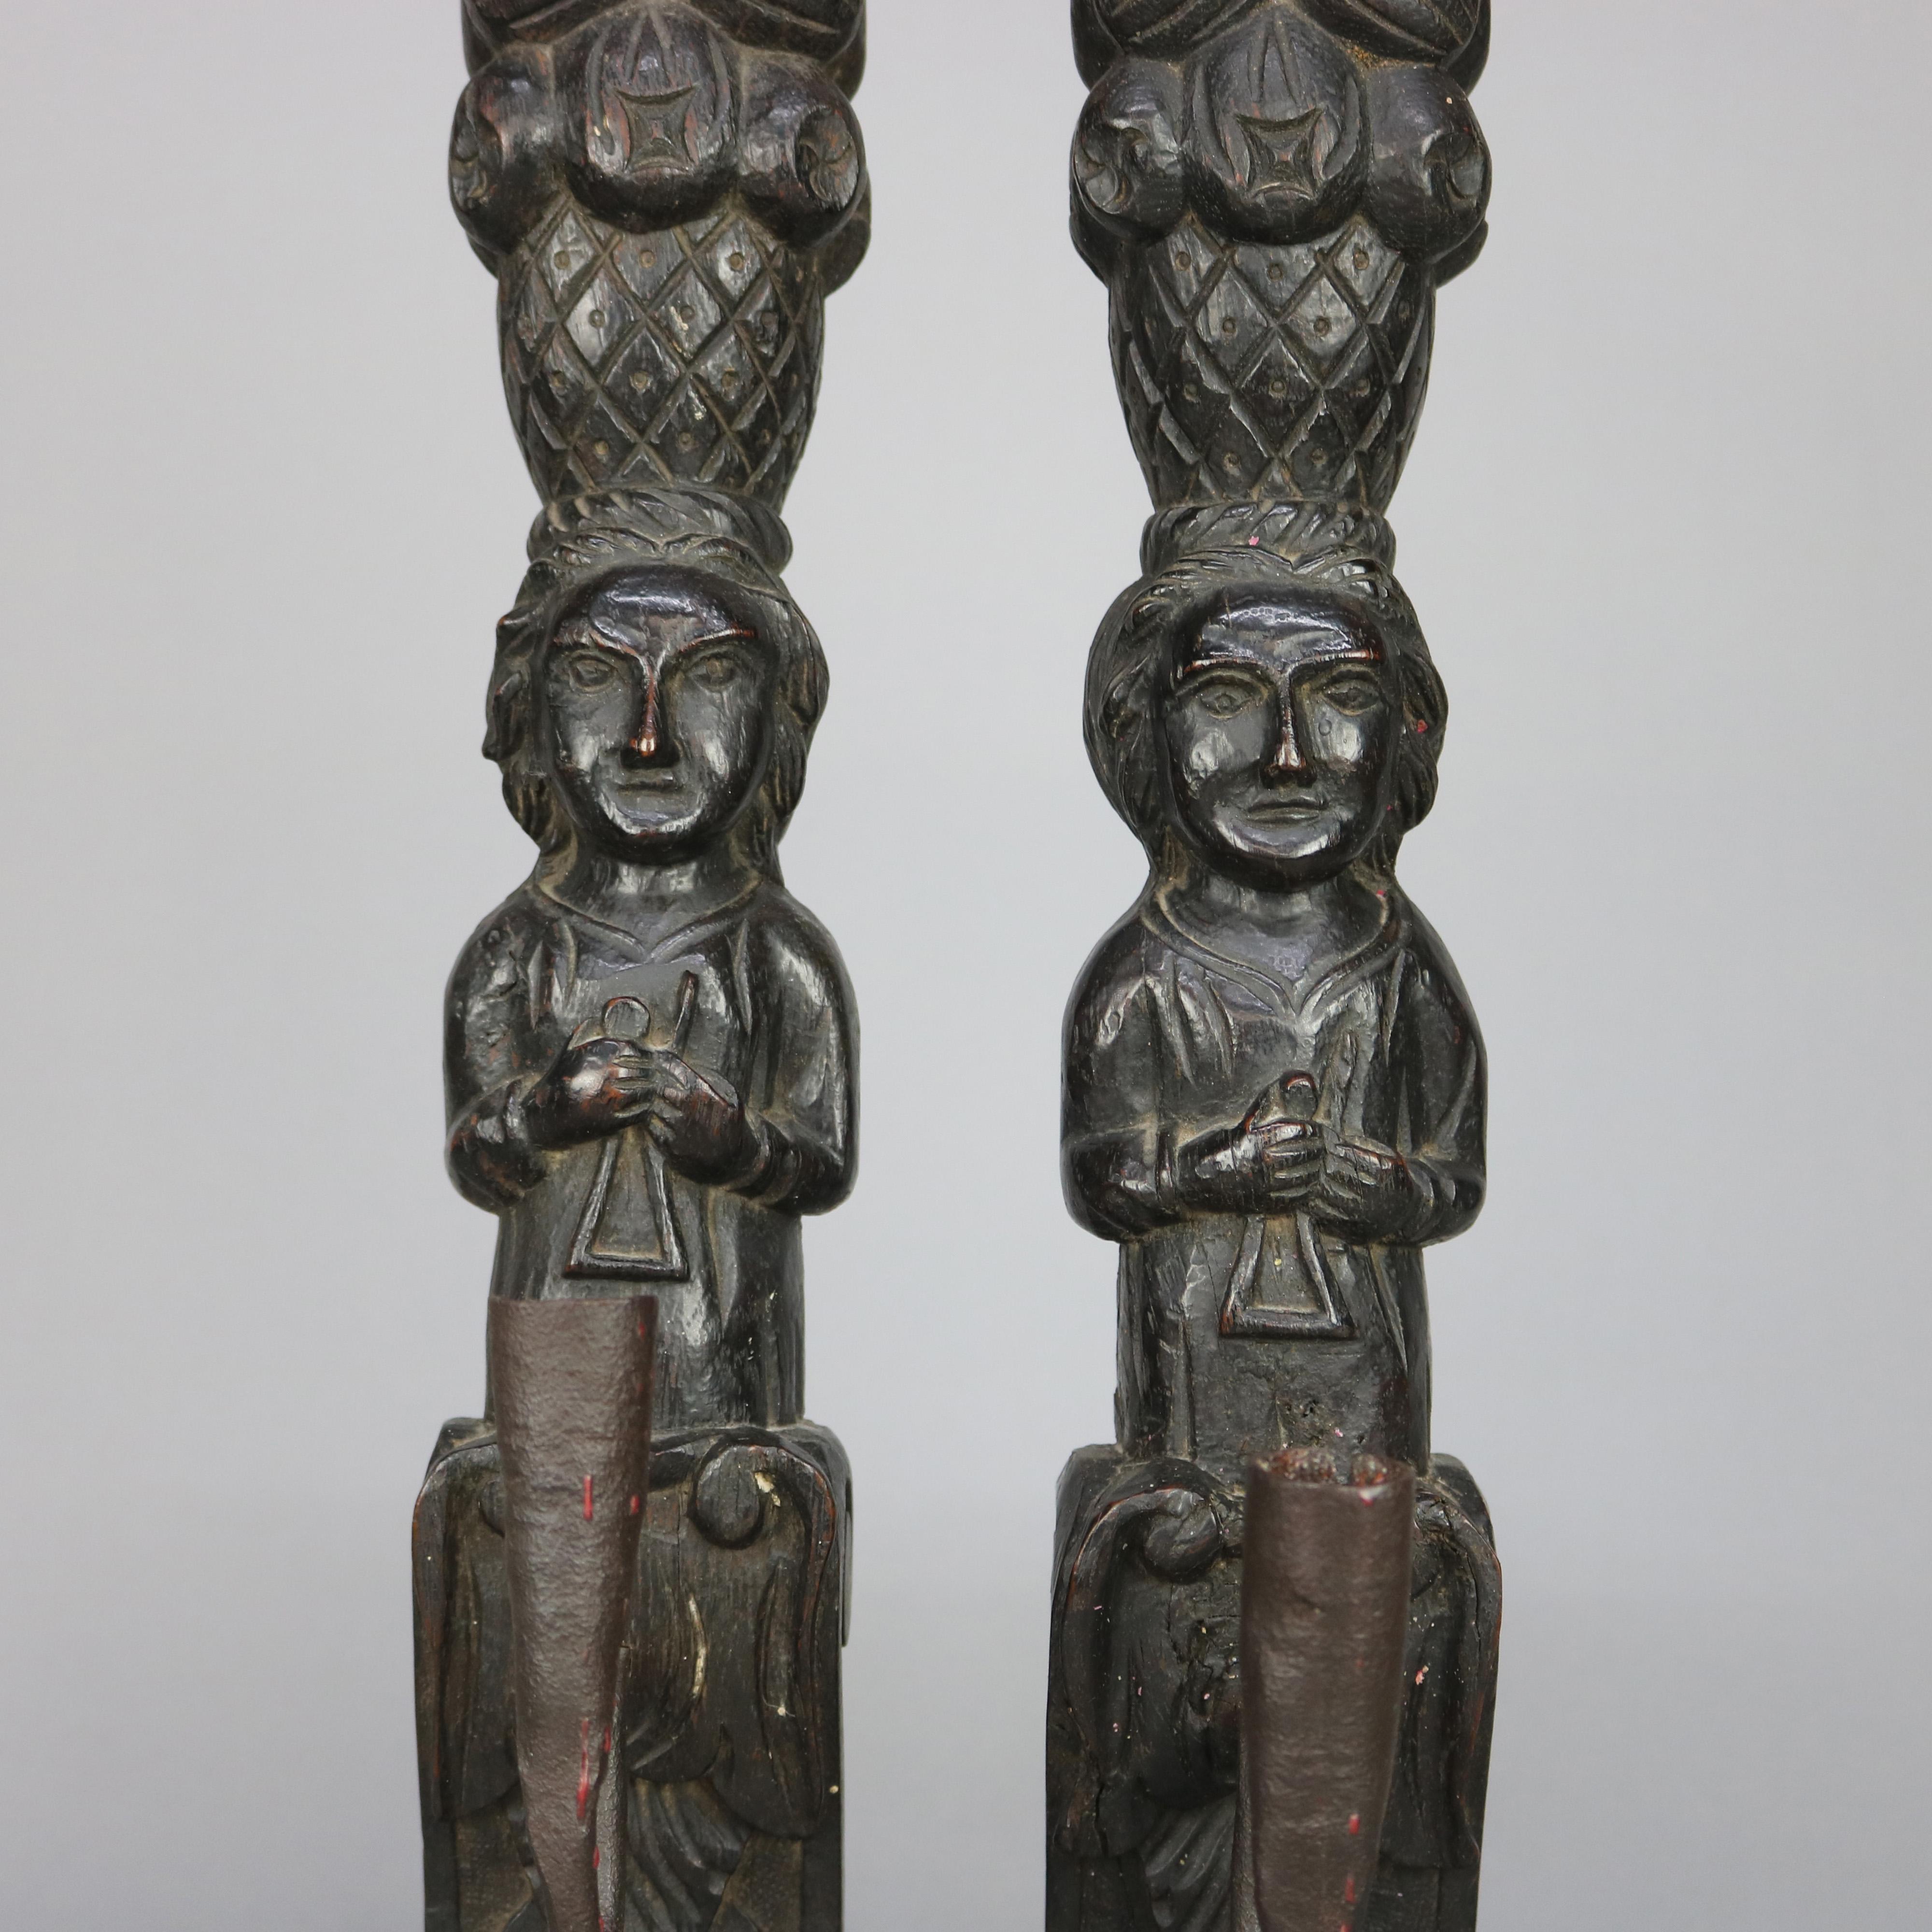 An antique set of early Jacobean Tudor candle wall sconces offer carved oak panels in the form of tribal food gatherers having baskets of fruits with C-scroll handwrought iron arms terminating in candle sockets, 18th century.

Measures: 20.5